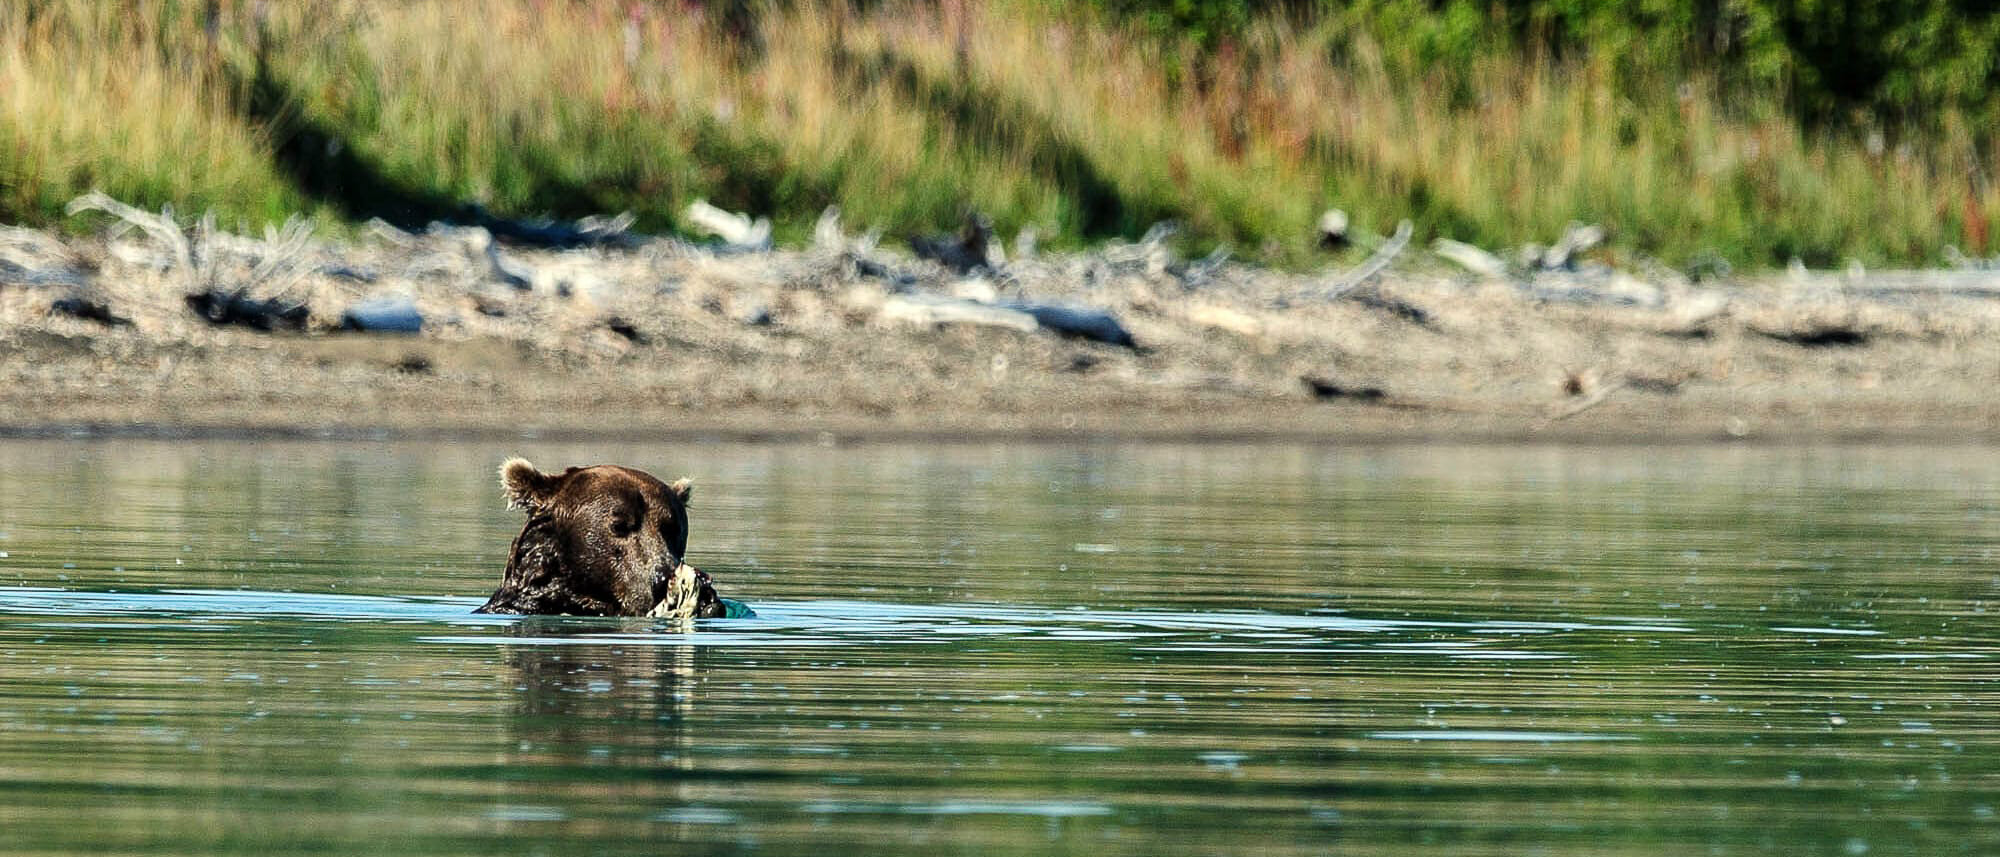 a bear eats a fish in the river